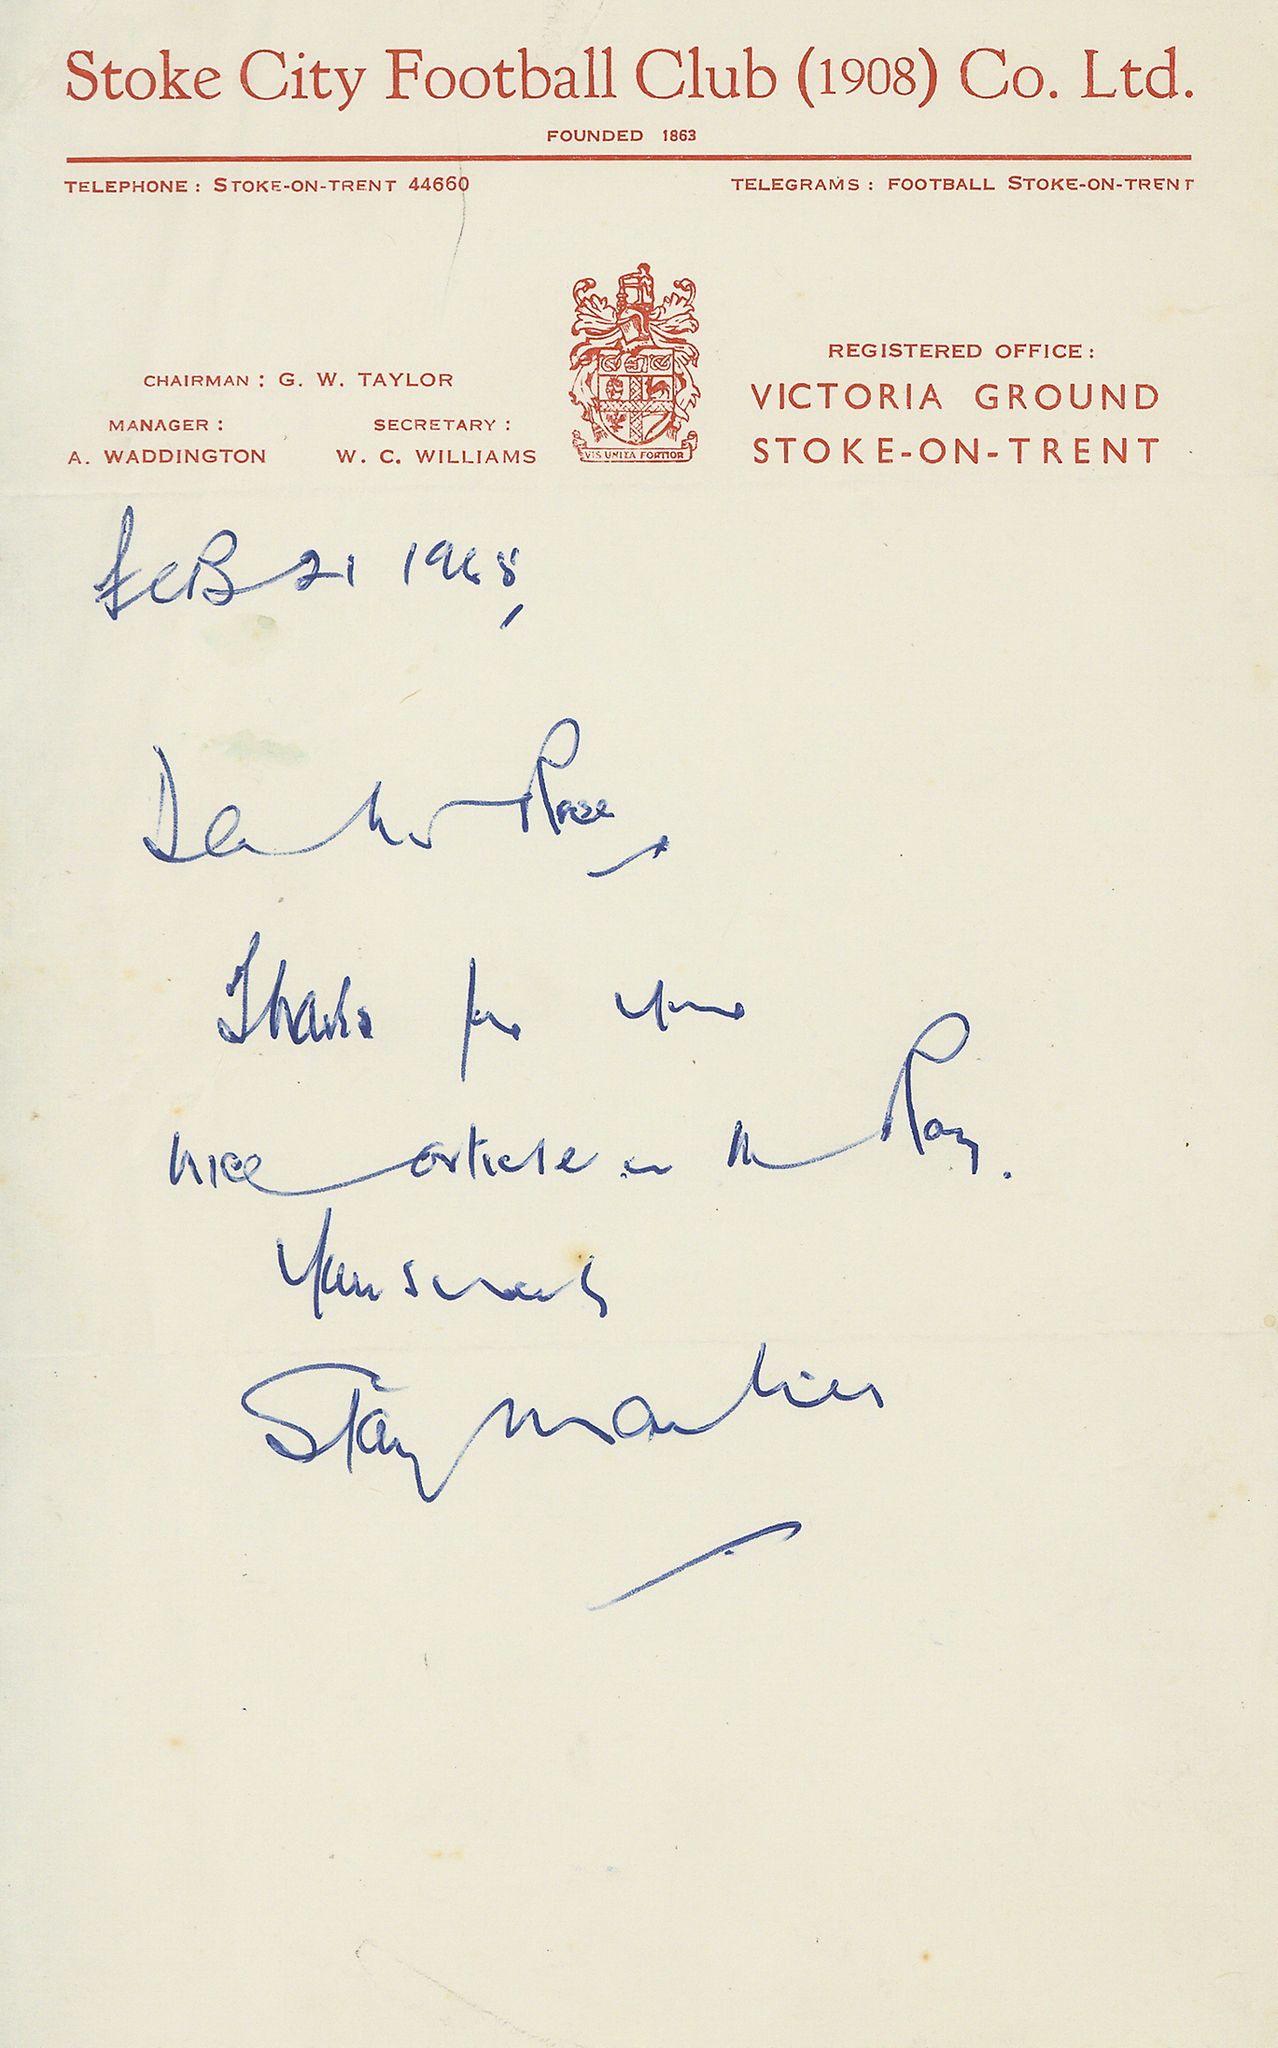 MATTHEWS, STANLEY - Autograph note signed on Stoke City Football Club headed paper Autograph note